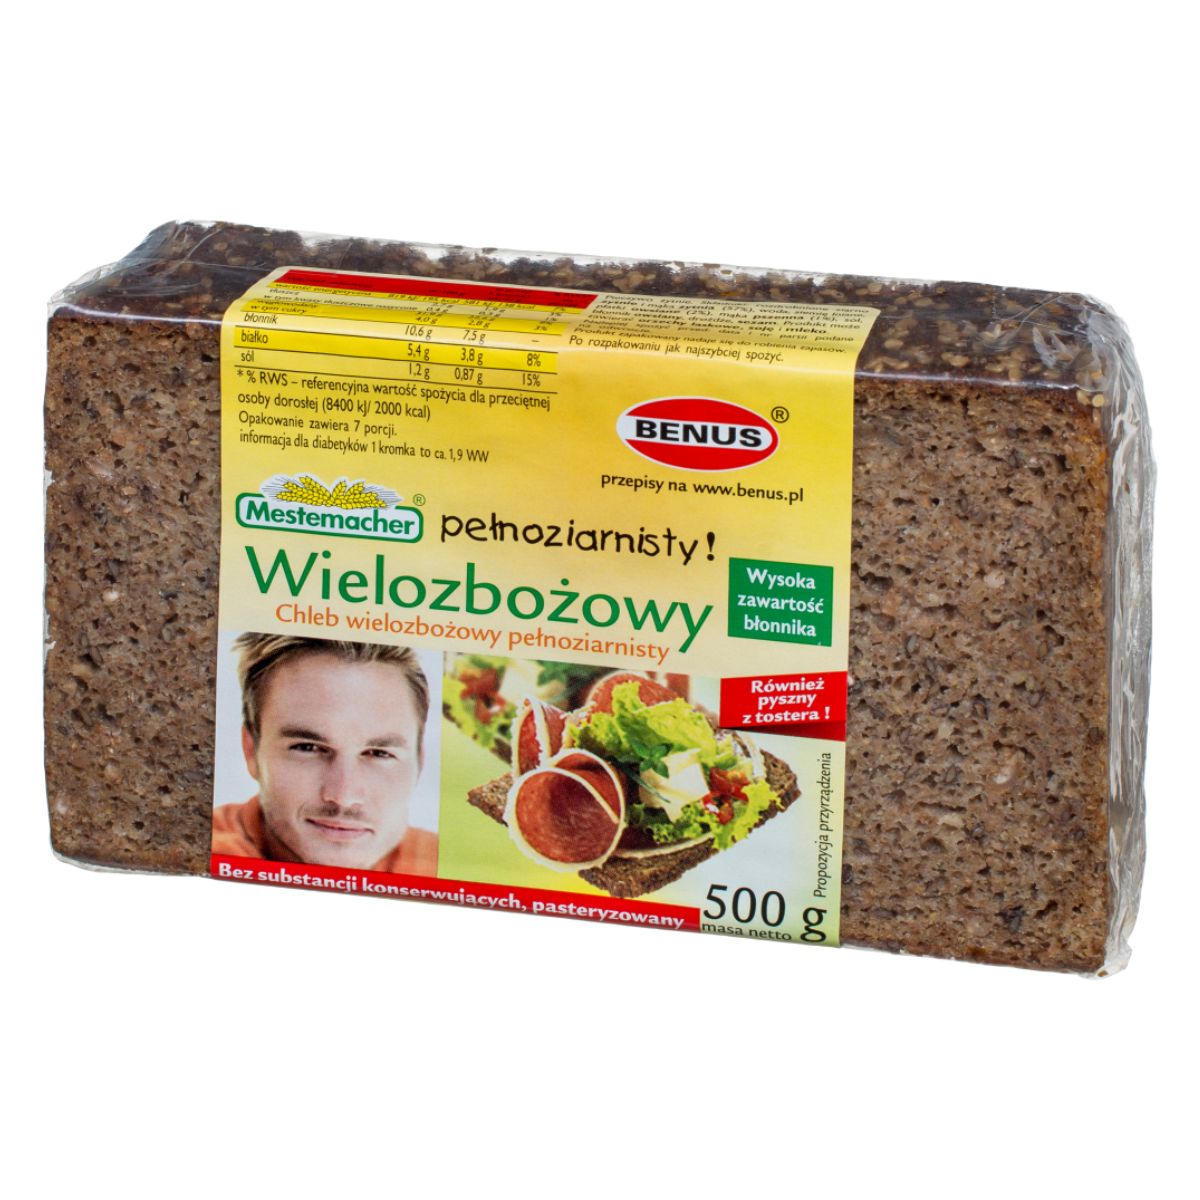 A Benus - Mestemacher Multigrain Wholemeal Bread - 500g with meat on it.